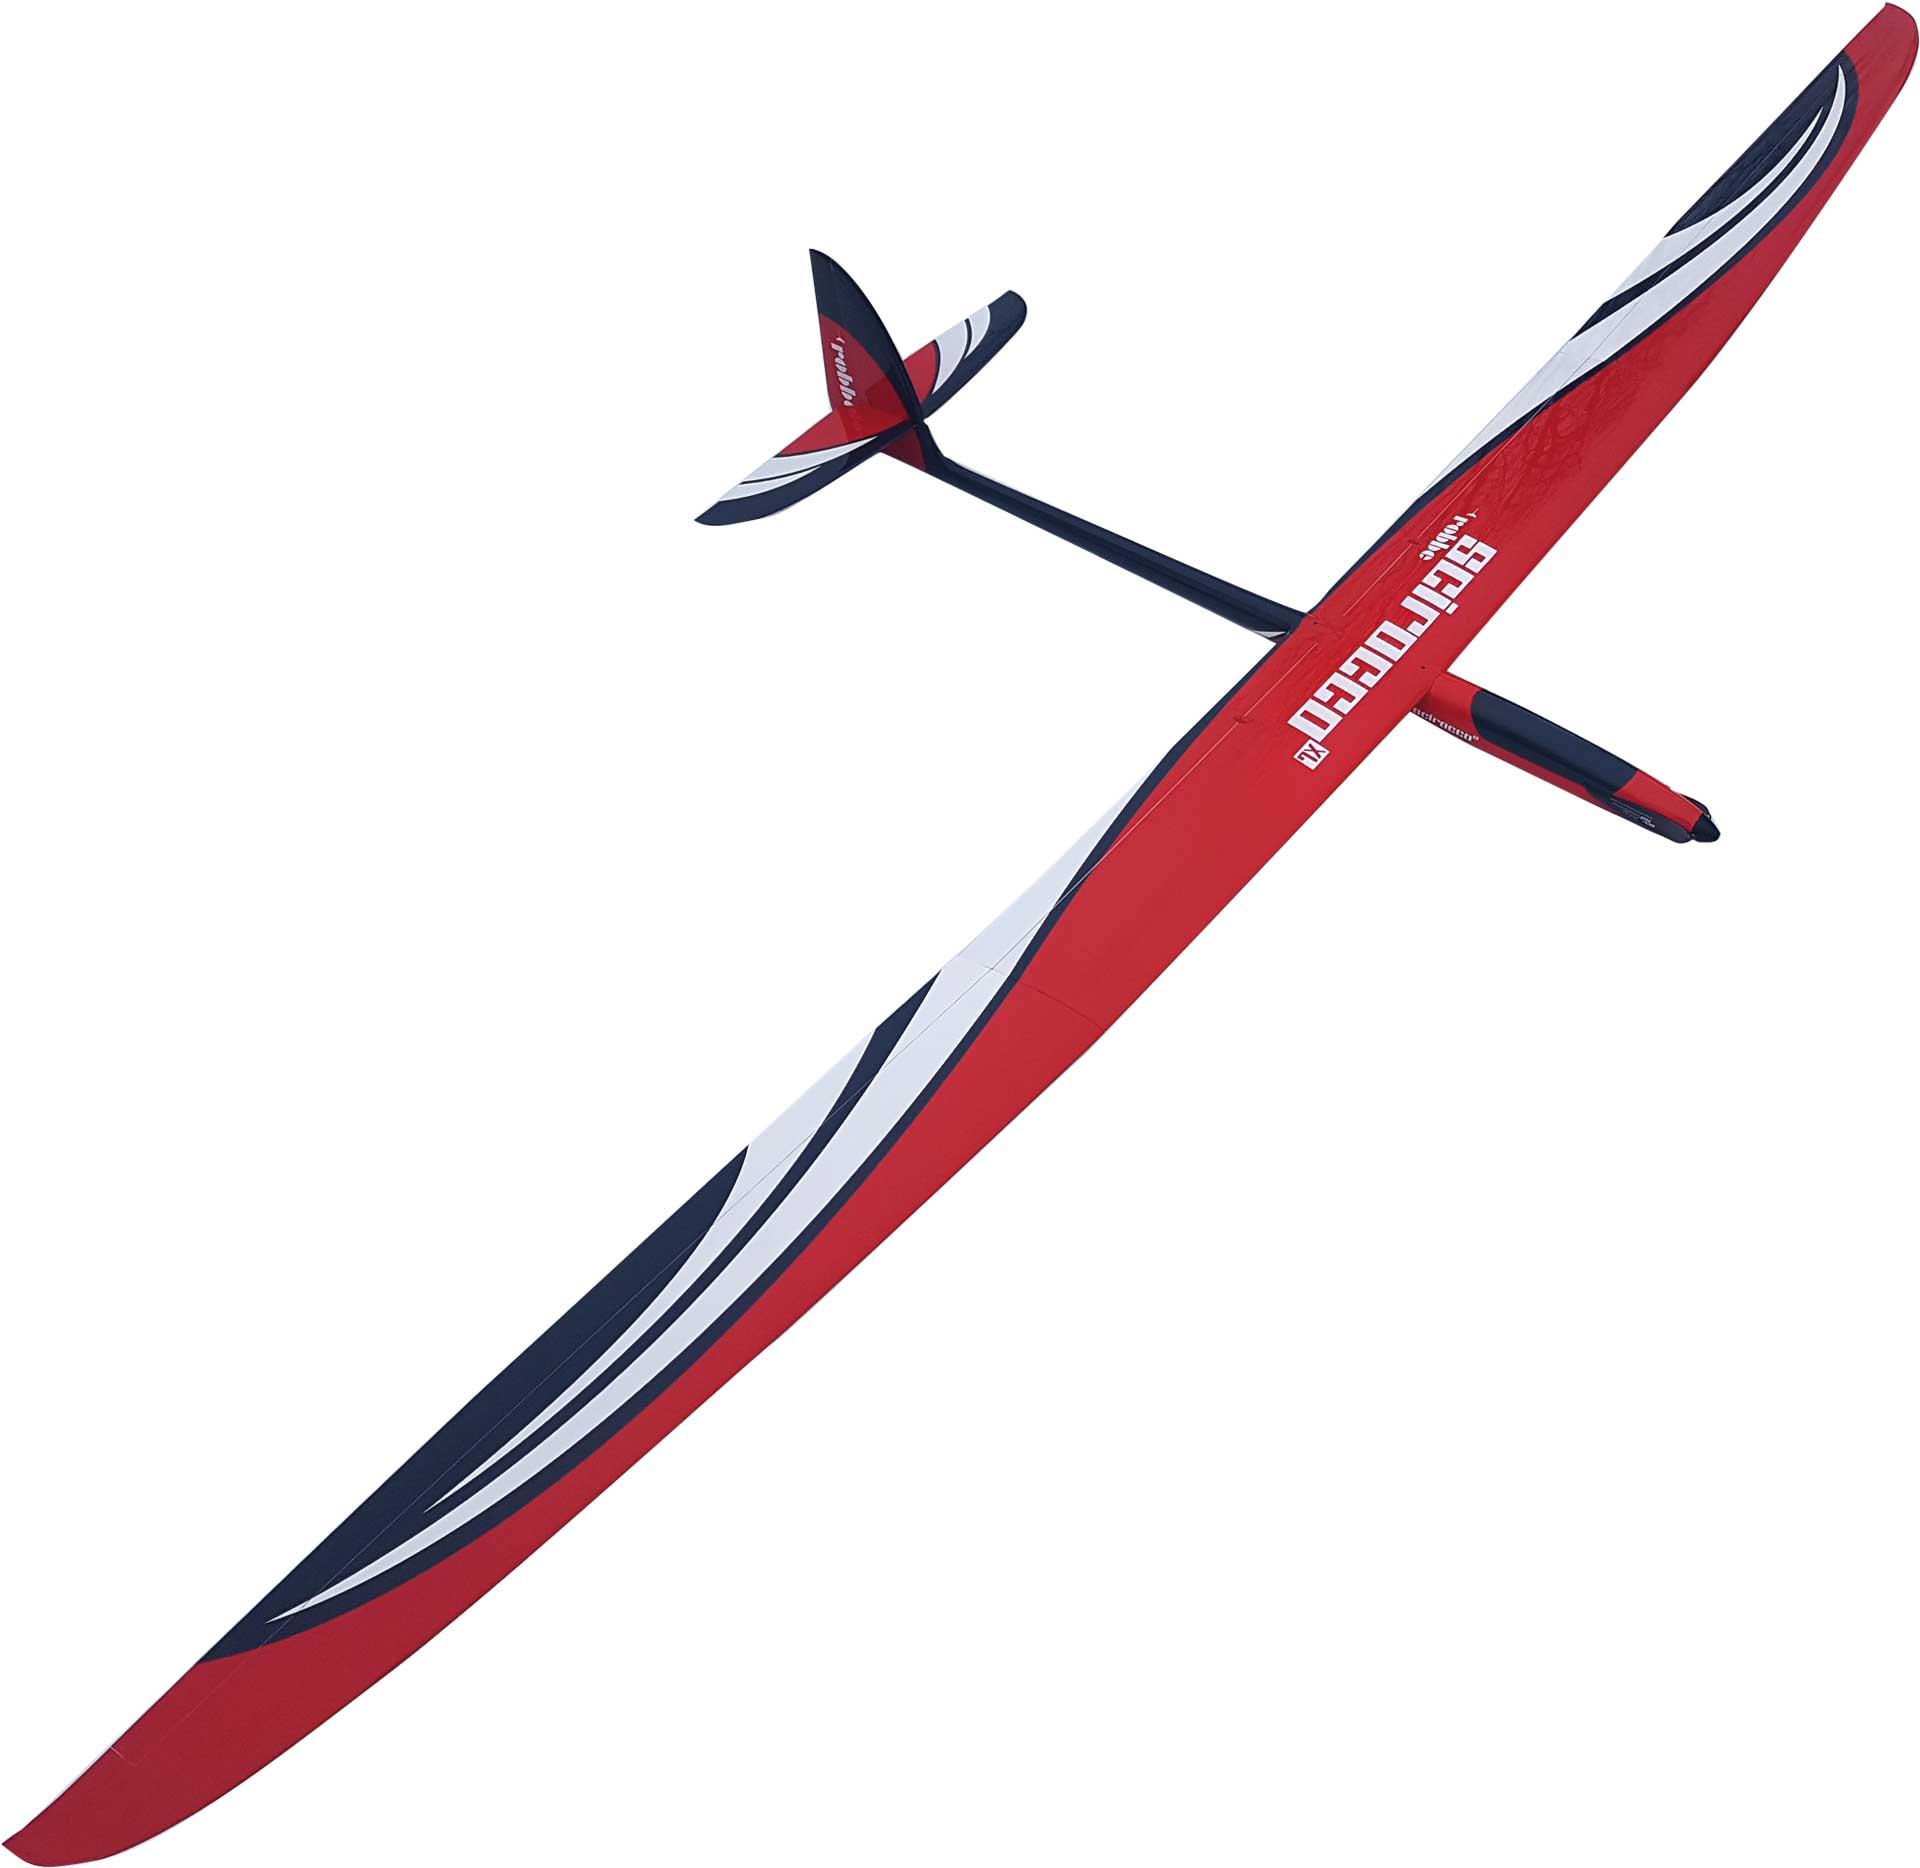 Robbe Modellsport SCIROCCO XL 4,5M PNP (RED ) FULL-GRP HIGH PERFORMANCE GLIDER WITH 4 FLAP WING